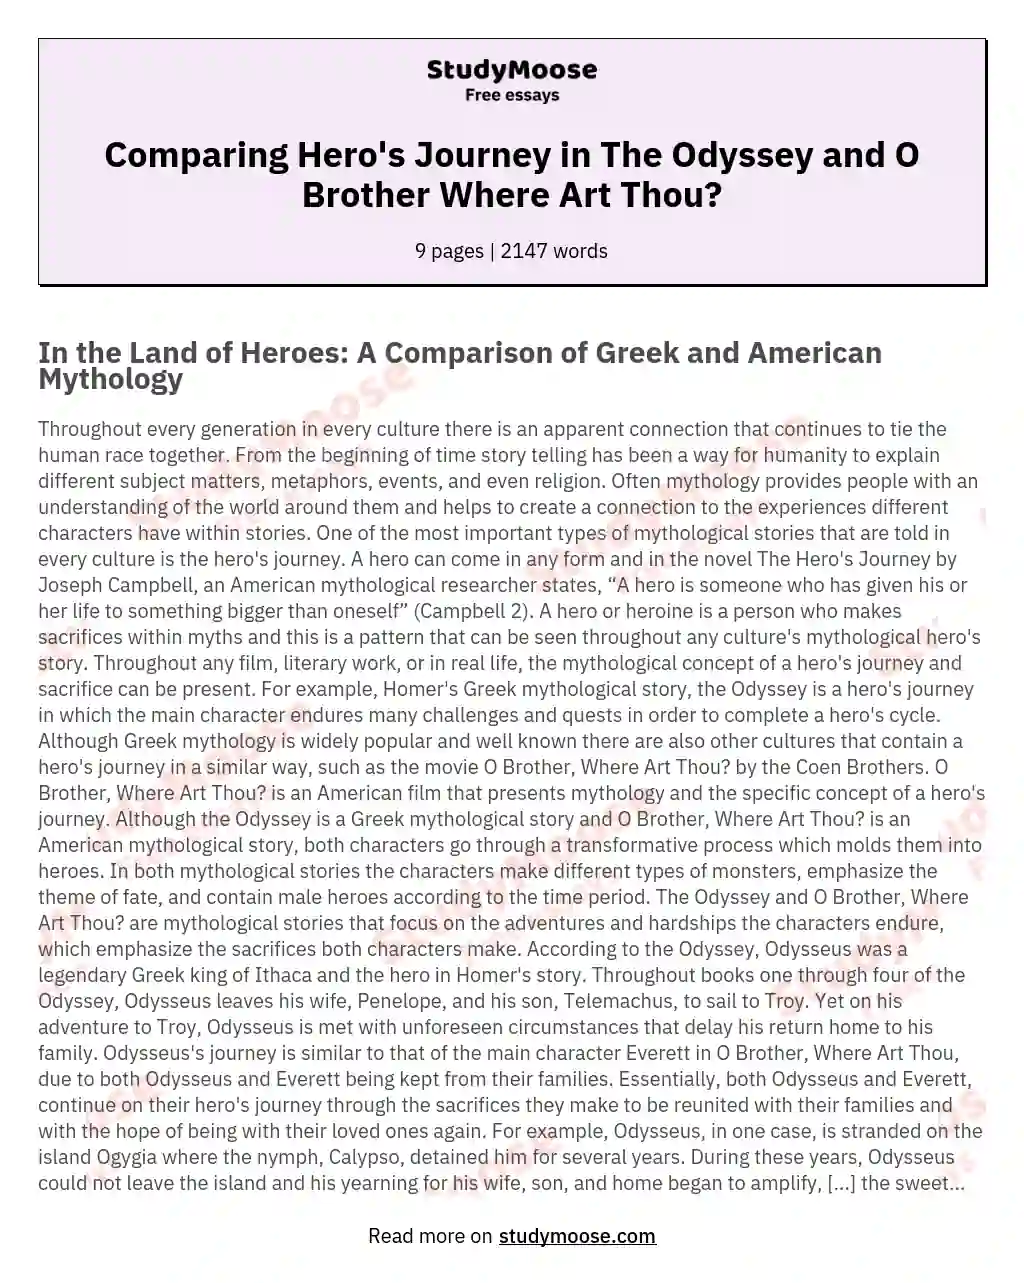 A comparison of the Similarities and Differences in the Heros Journey in the Odyssey and O Brother Where Art Thou